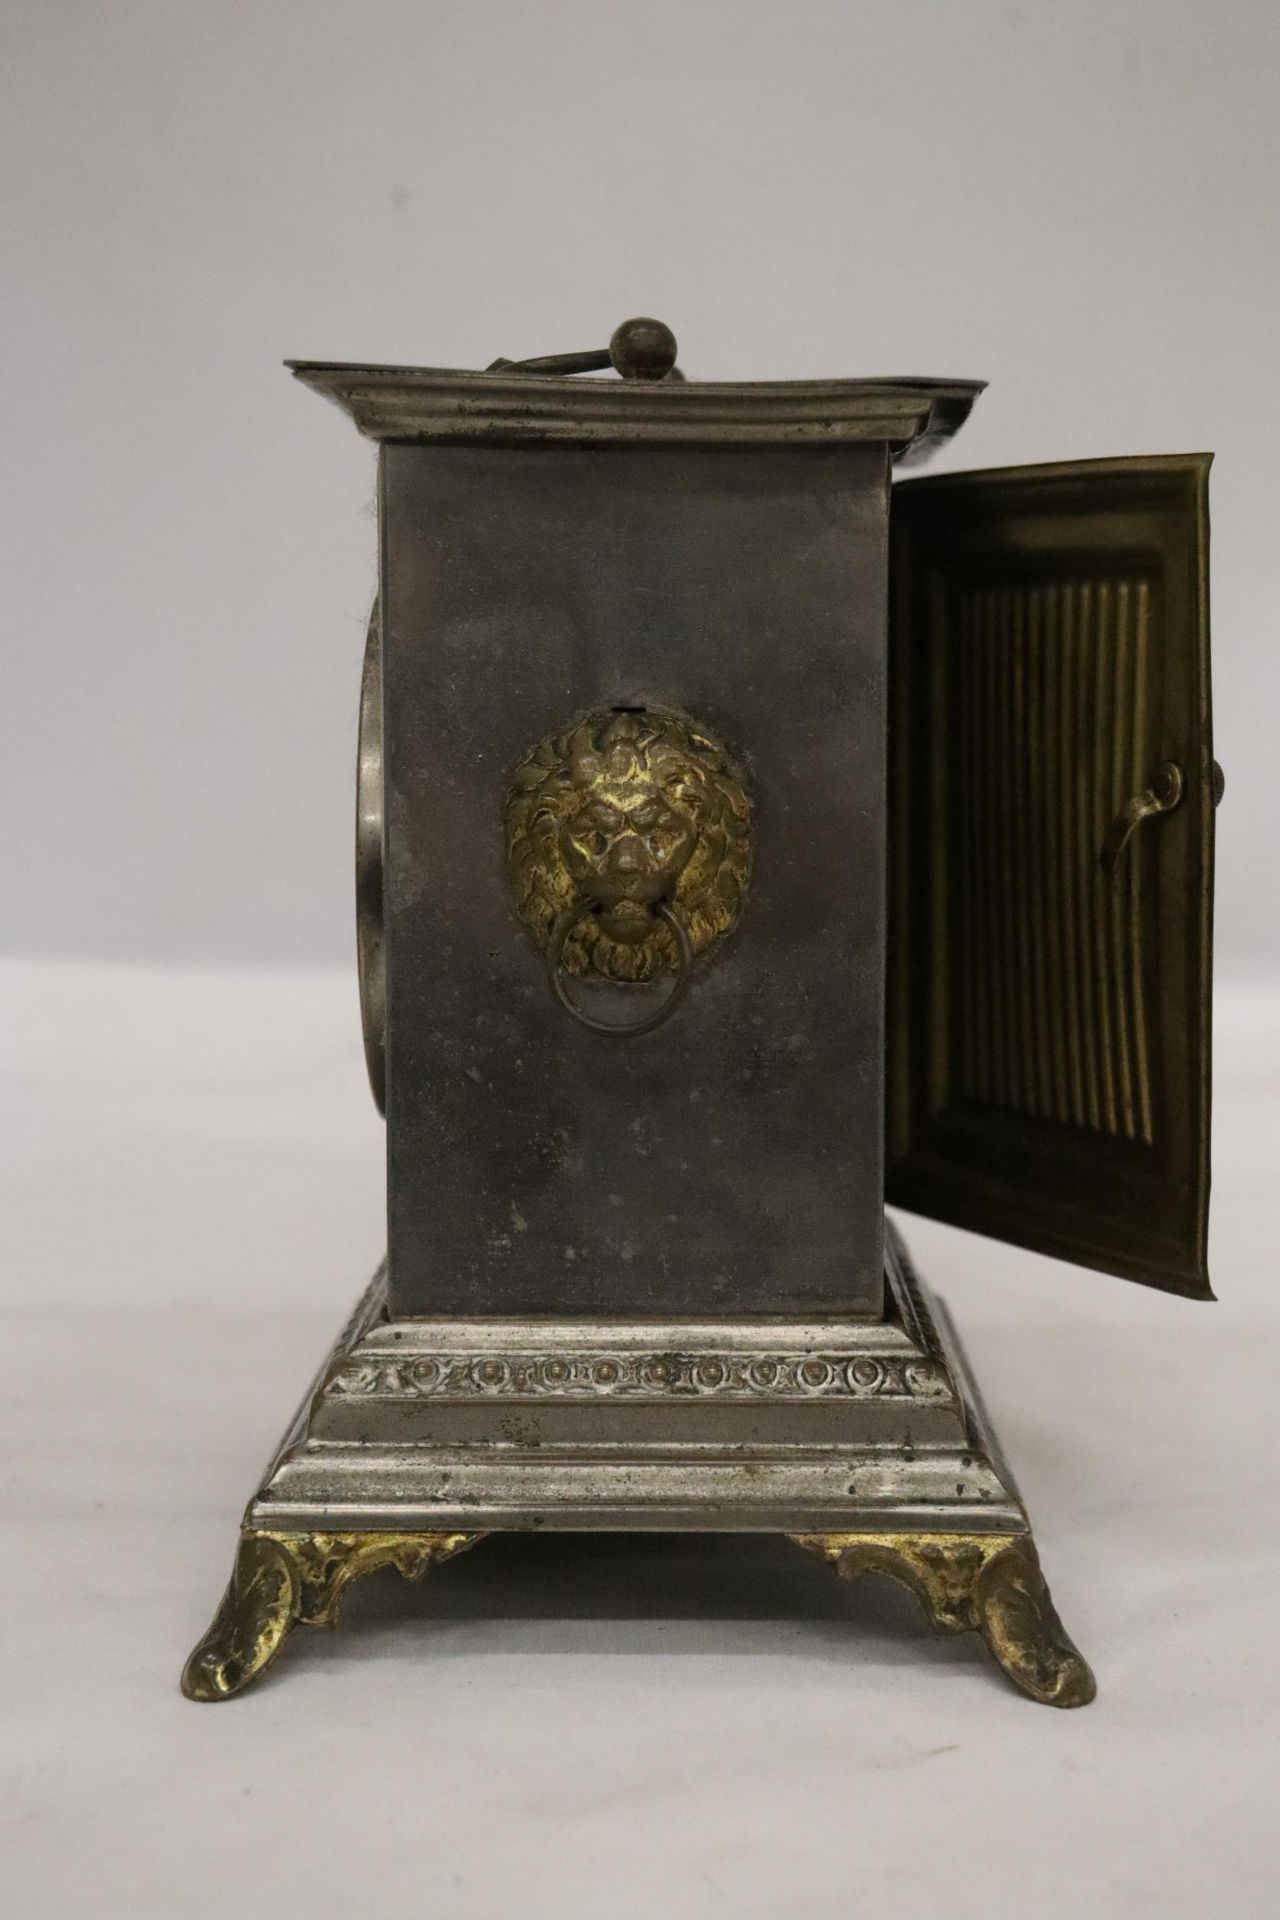 AN ORNATE VINTAGE ALARM CARRIAGE CLOCK WITH LION HANDLE DECORATION TO THE SIDES - POSSIBLY AN - Image 2 of 9